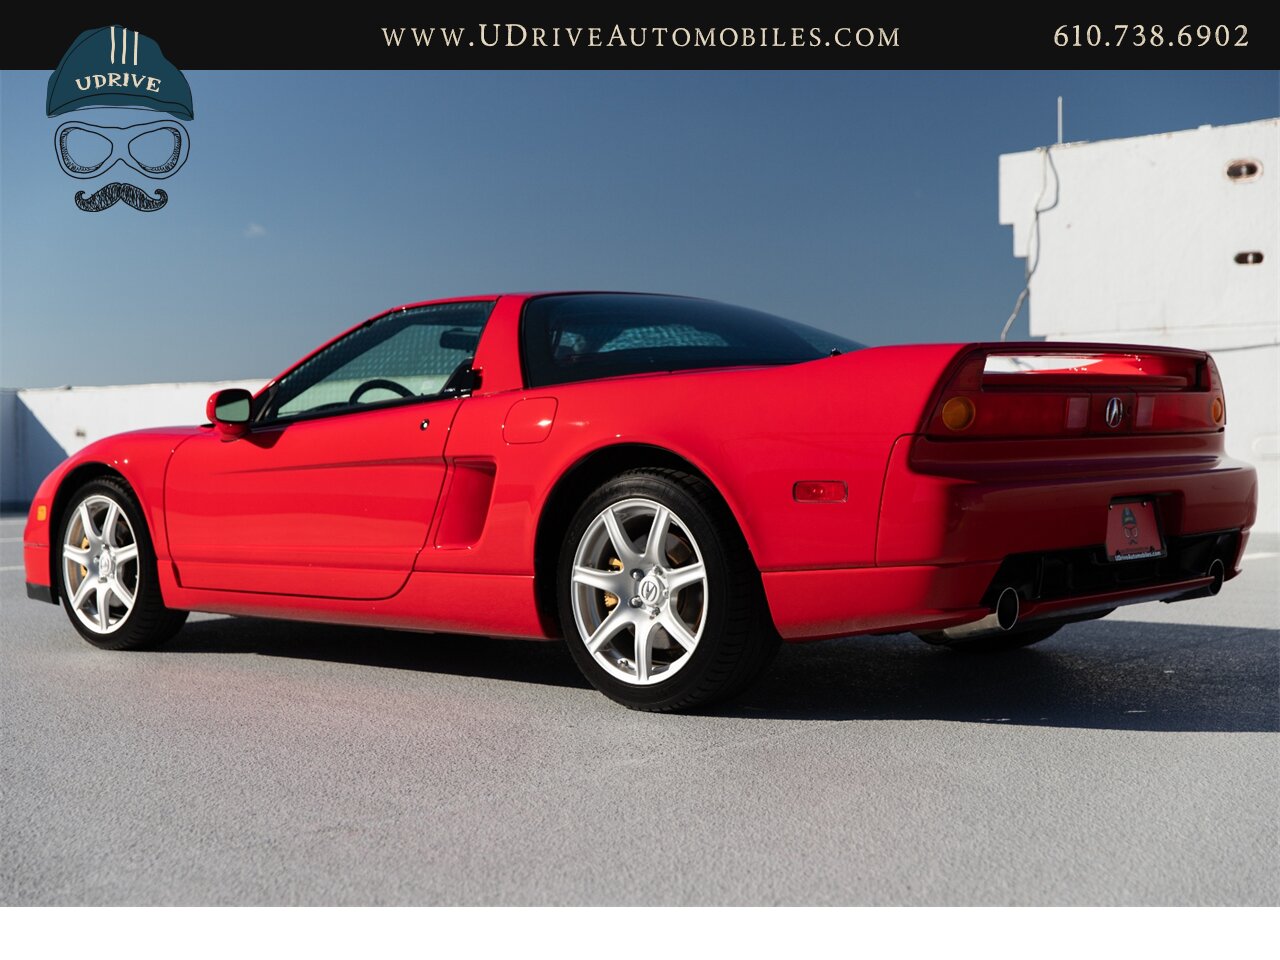 2004 Acura NSX NSX-T 21k mIles Red over Black  Fresh Timing Belt Service - Photo 5 - West Chester, PA 19382